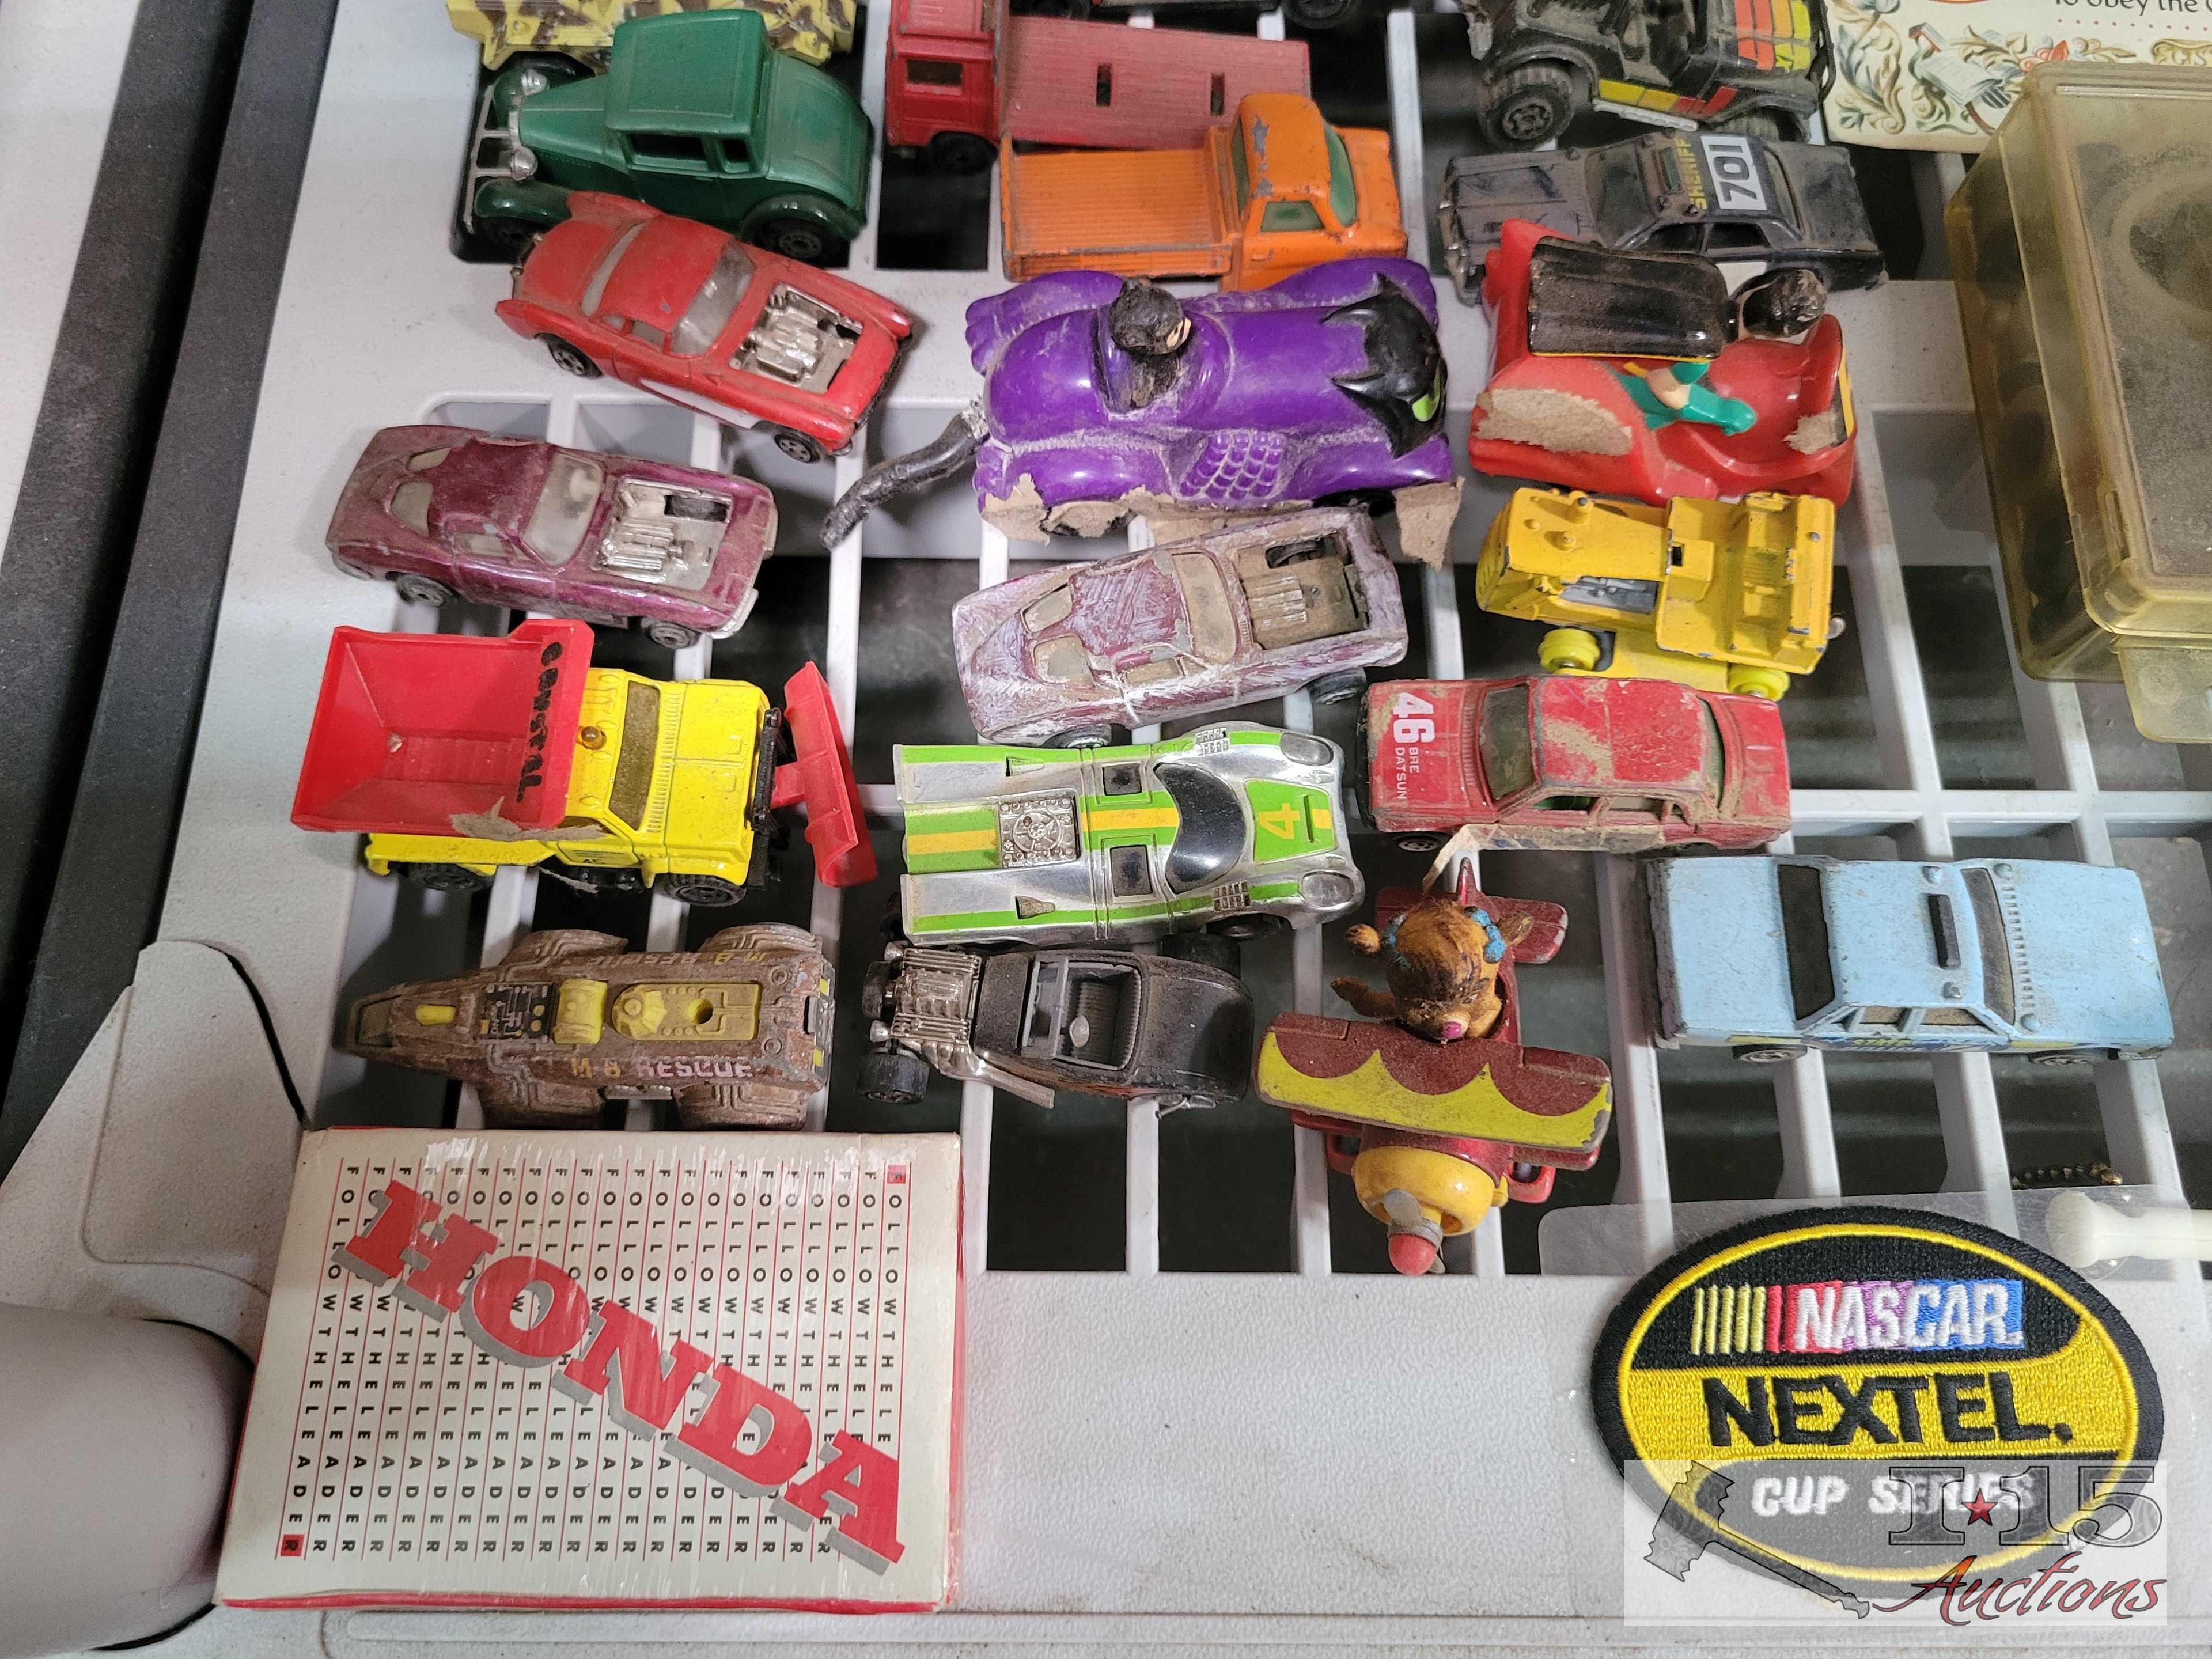 Toy Cars, Patches, Cards